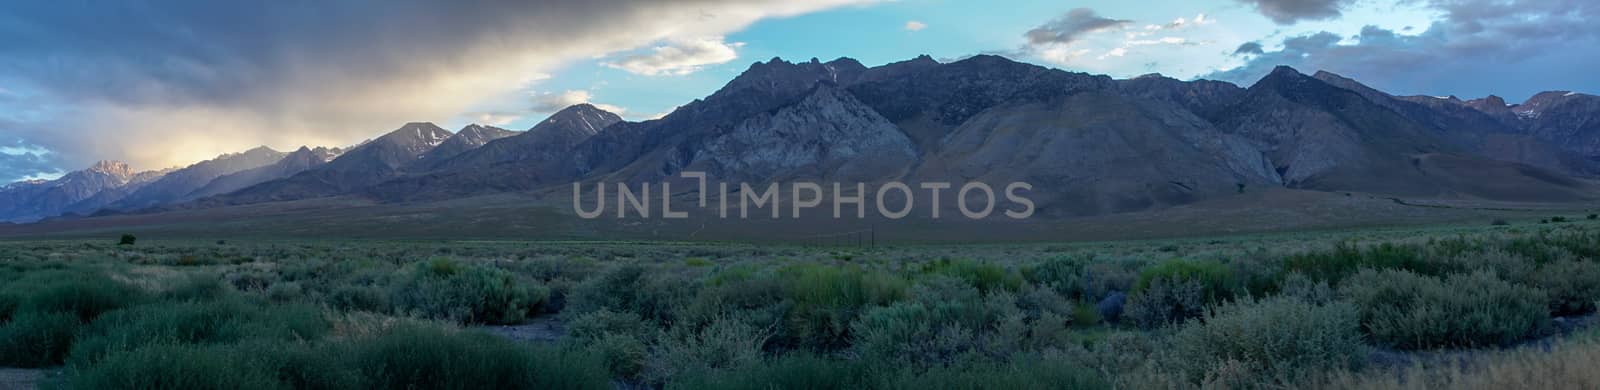 Mountain range with clouded colorful sunset, Eastern Sierra Nevada Mountains, Mono County, California, USA.